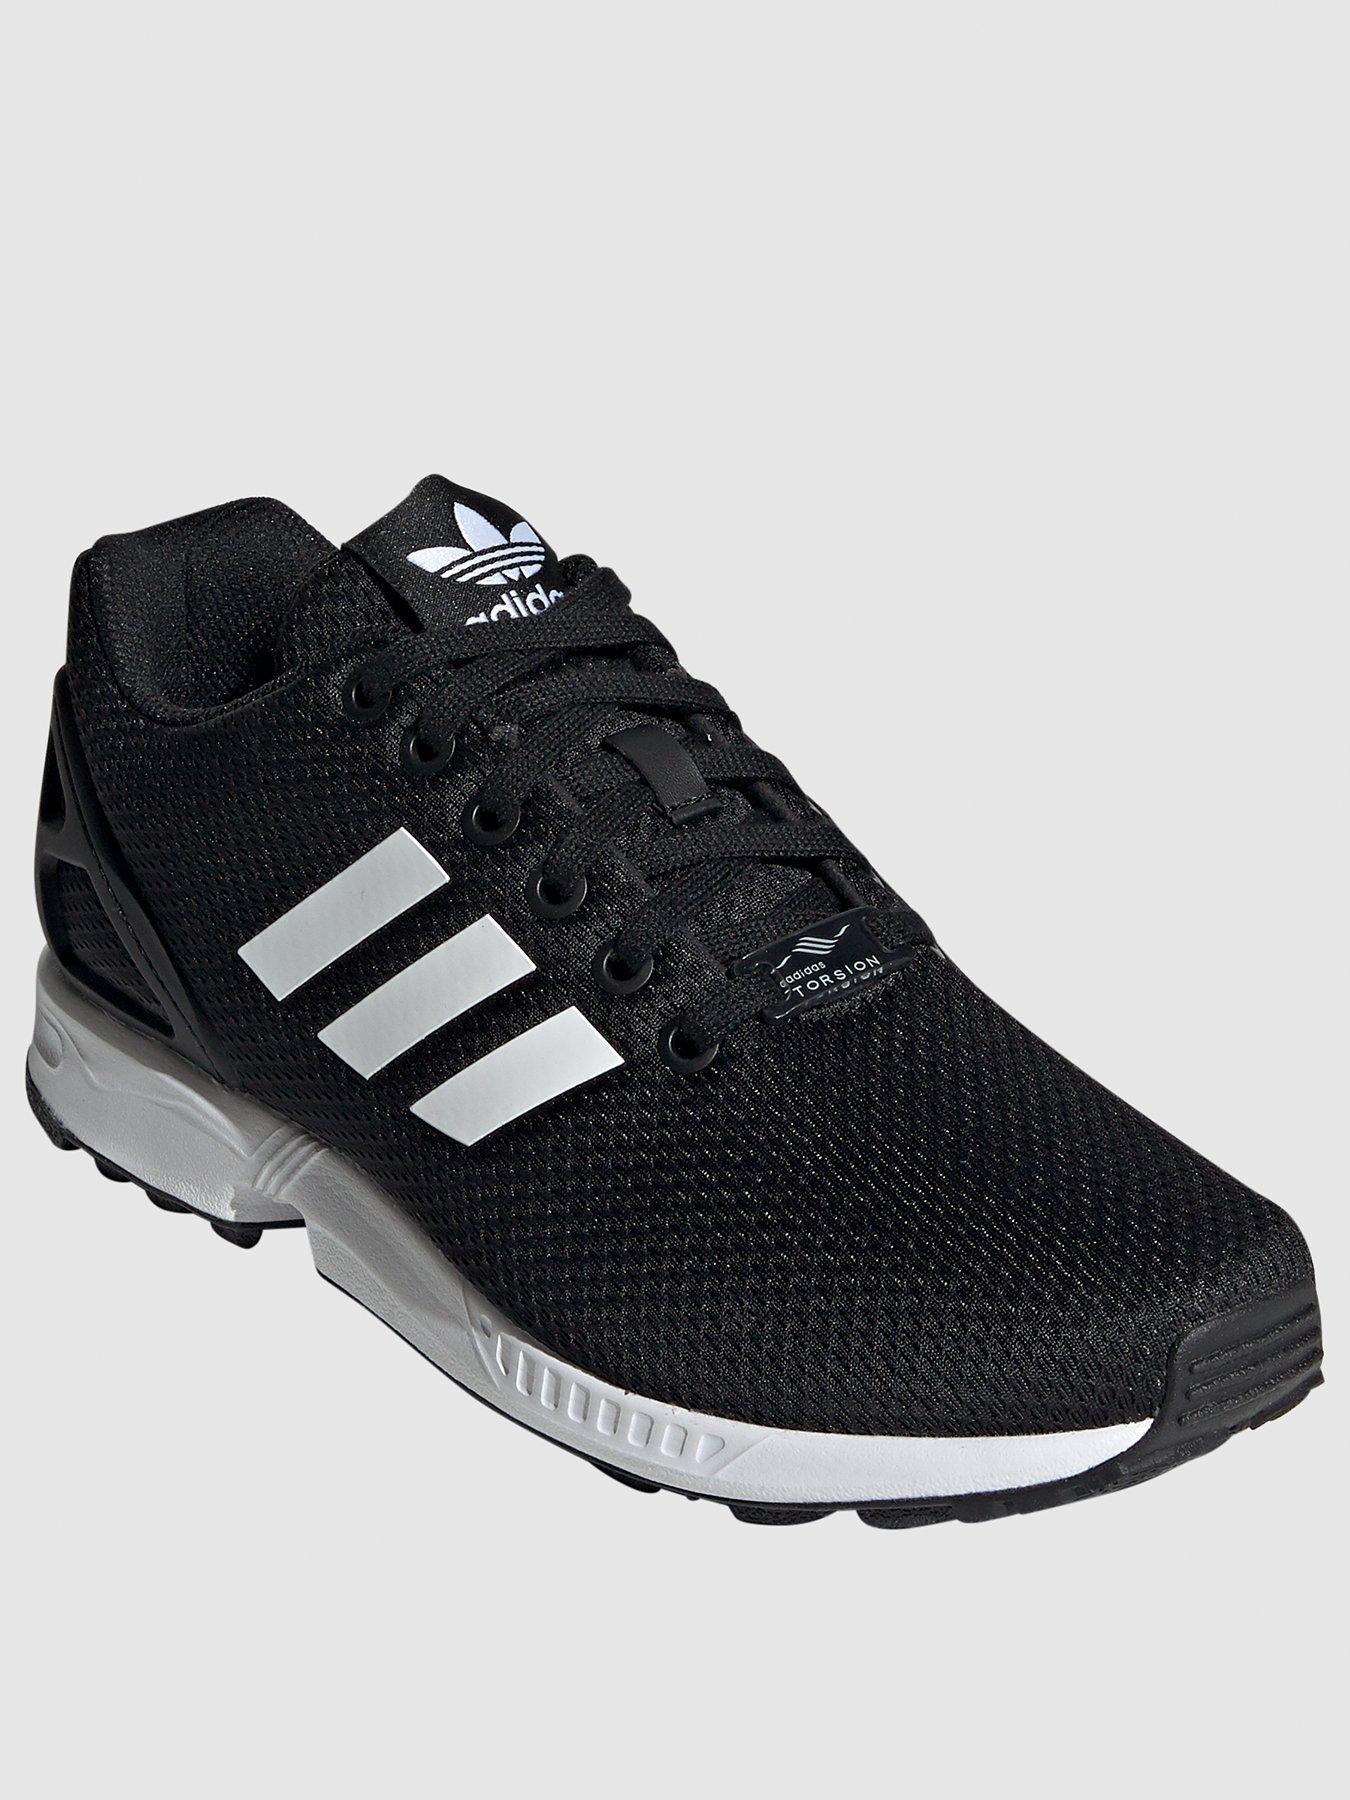 adidas Originals ZX Flux Trainers - Black/White | very.co.uk